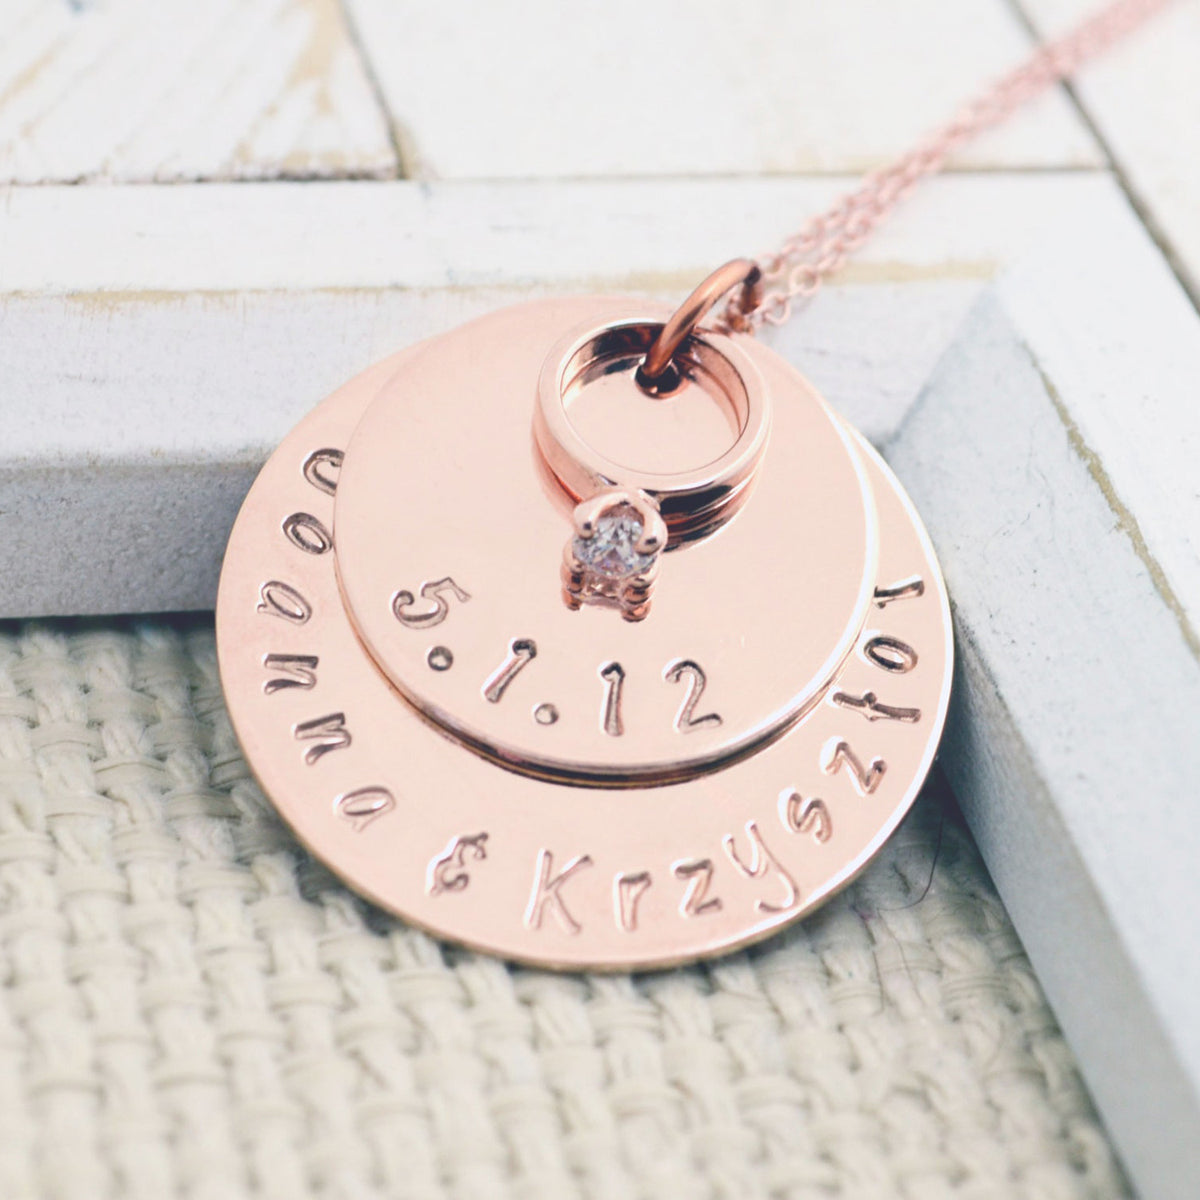 Rose Gold Wedding Ring Necklace - Love It Personalized